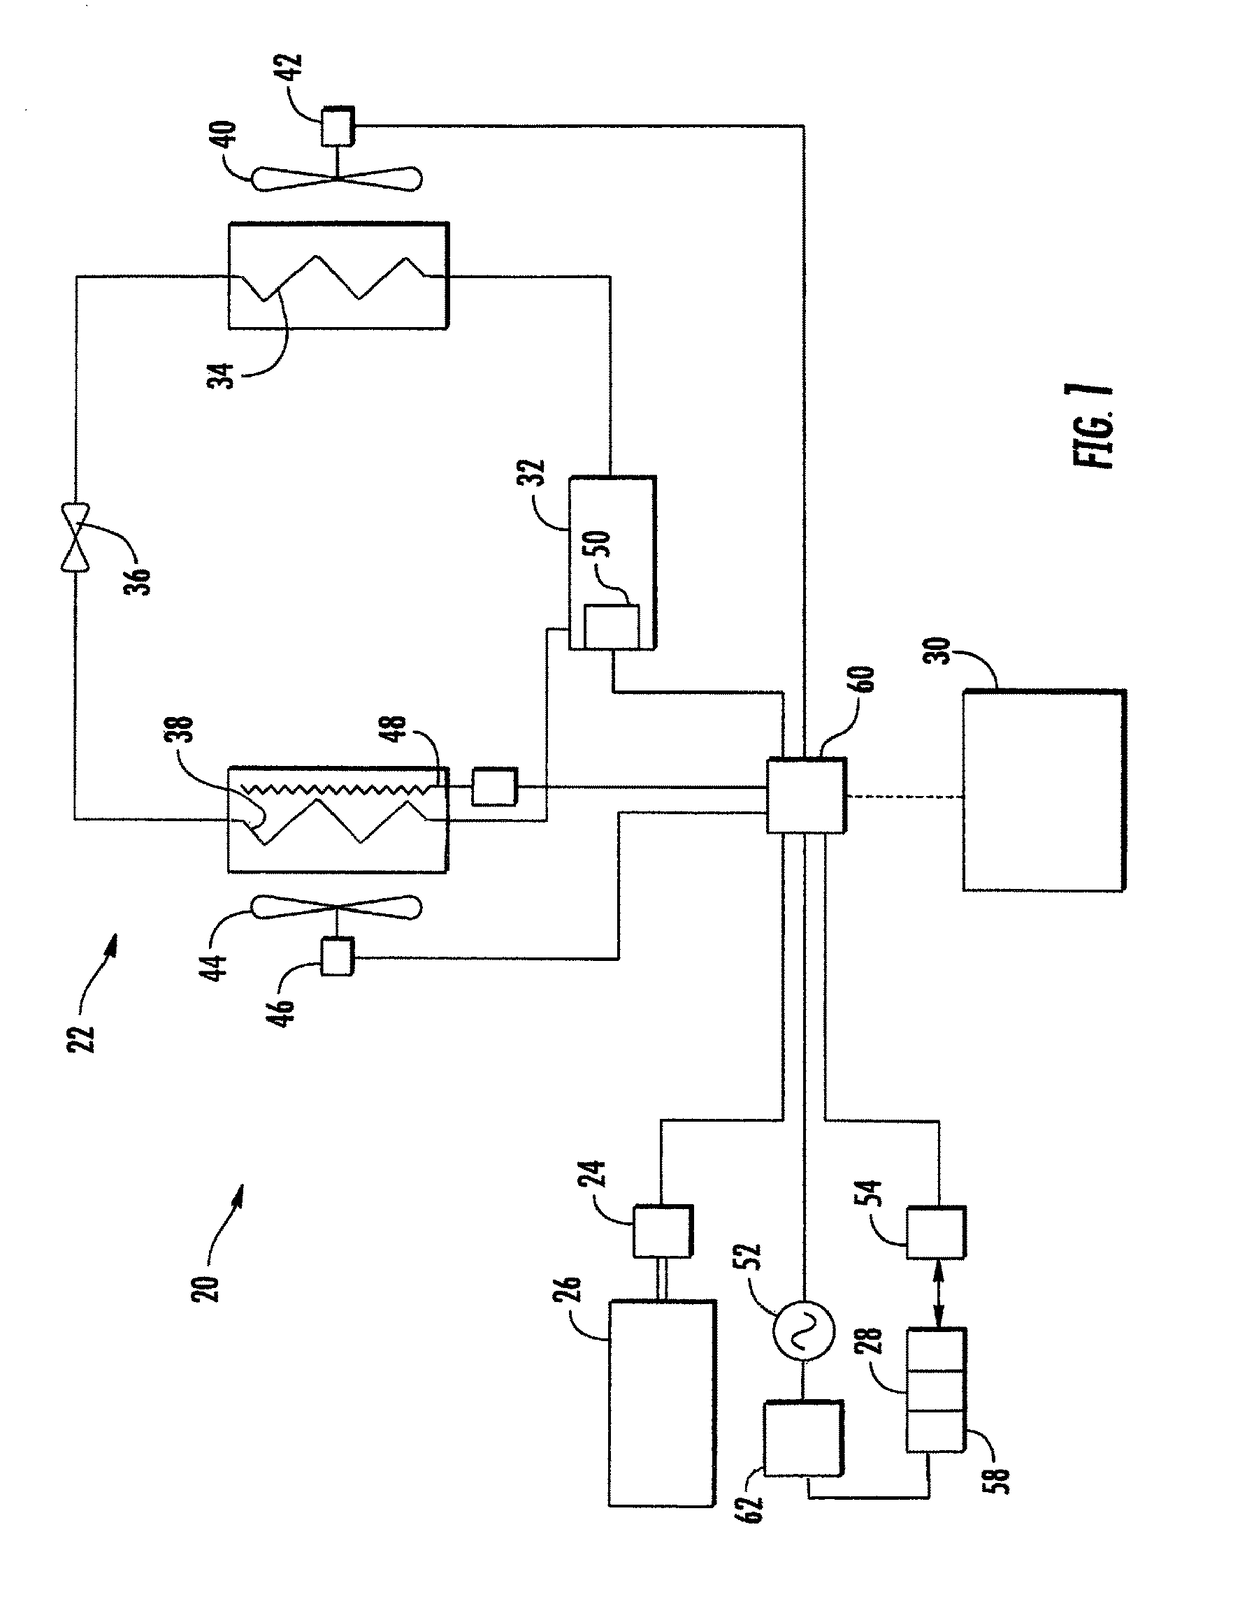 Transport refrigeration system and method for operating